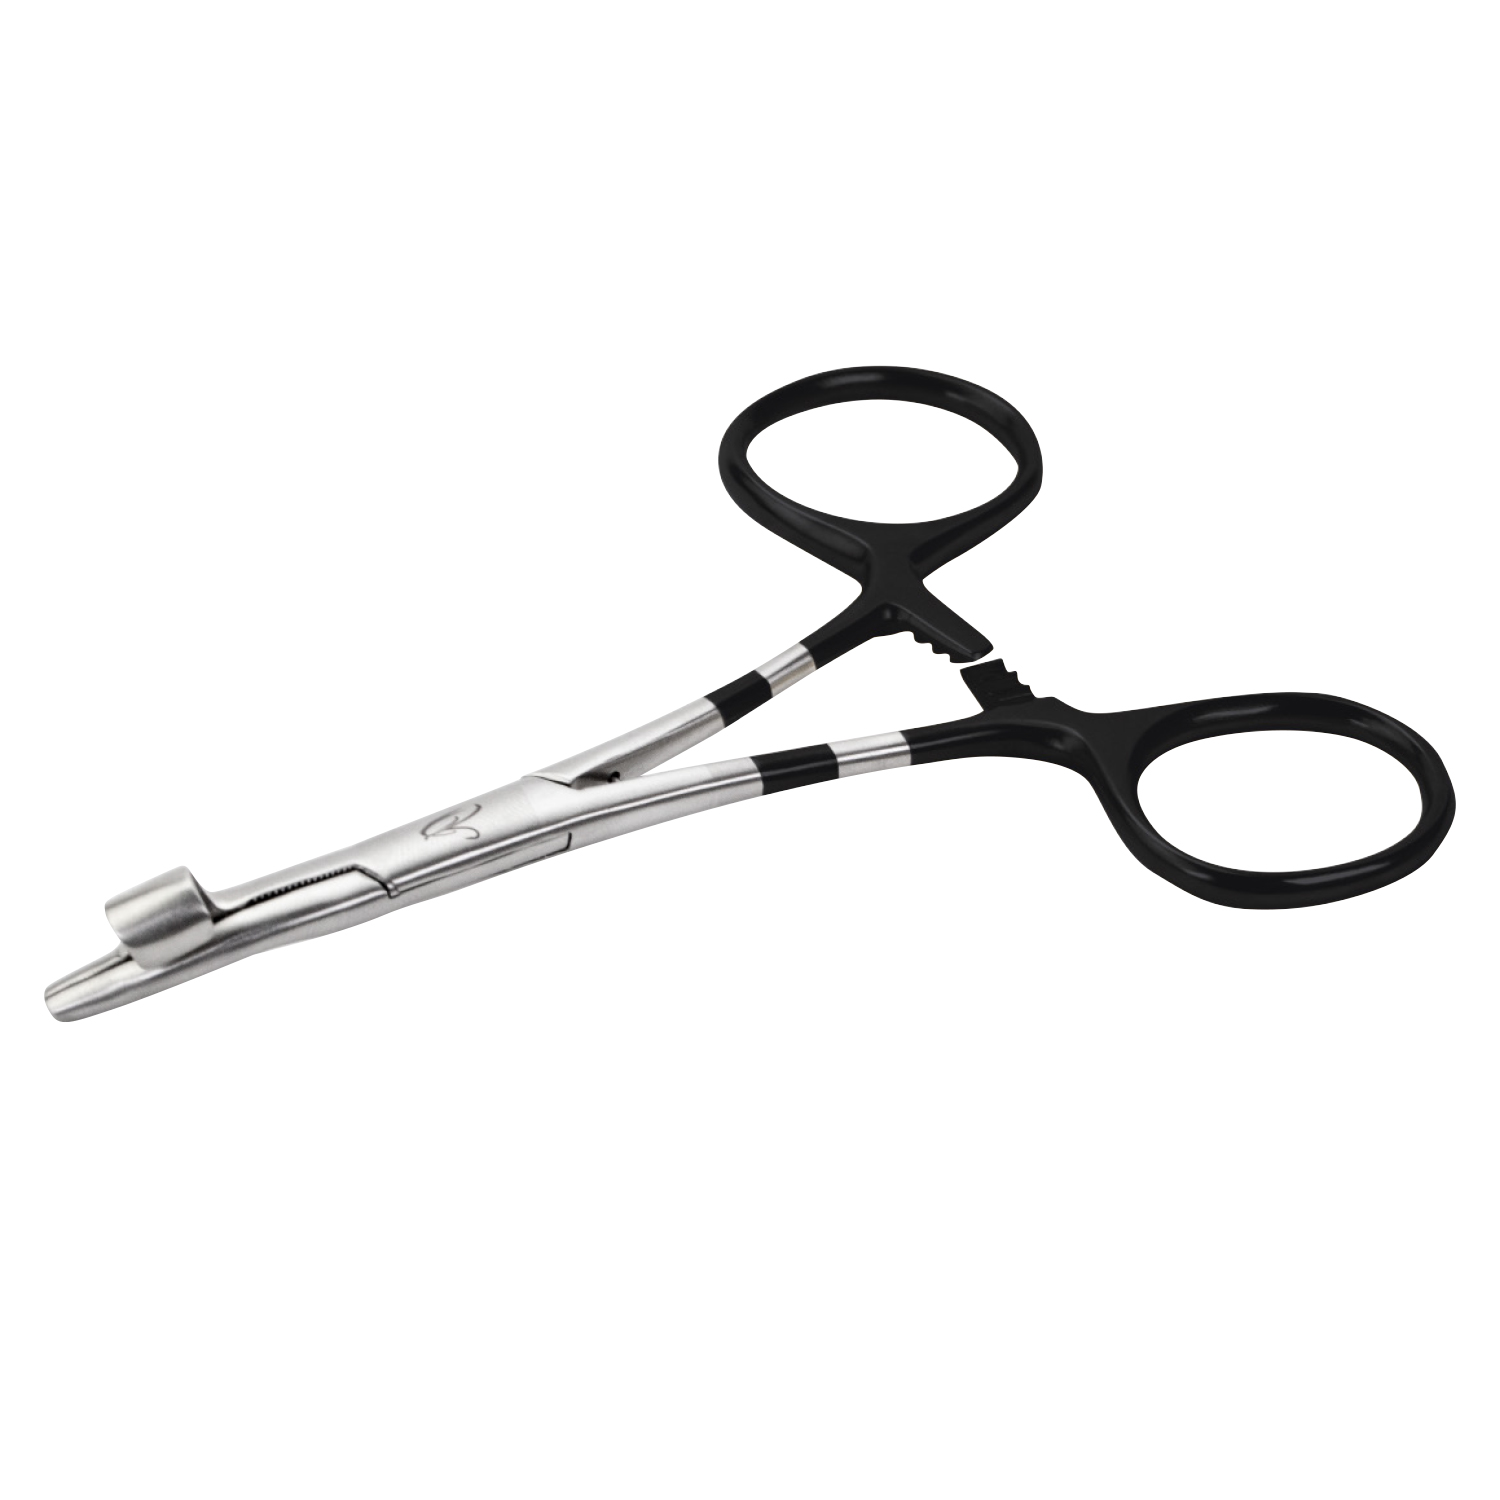 Hook Remover Pliers